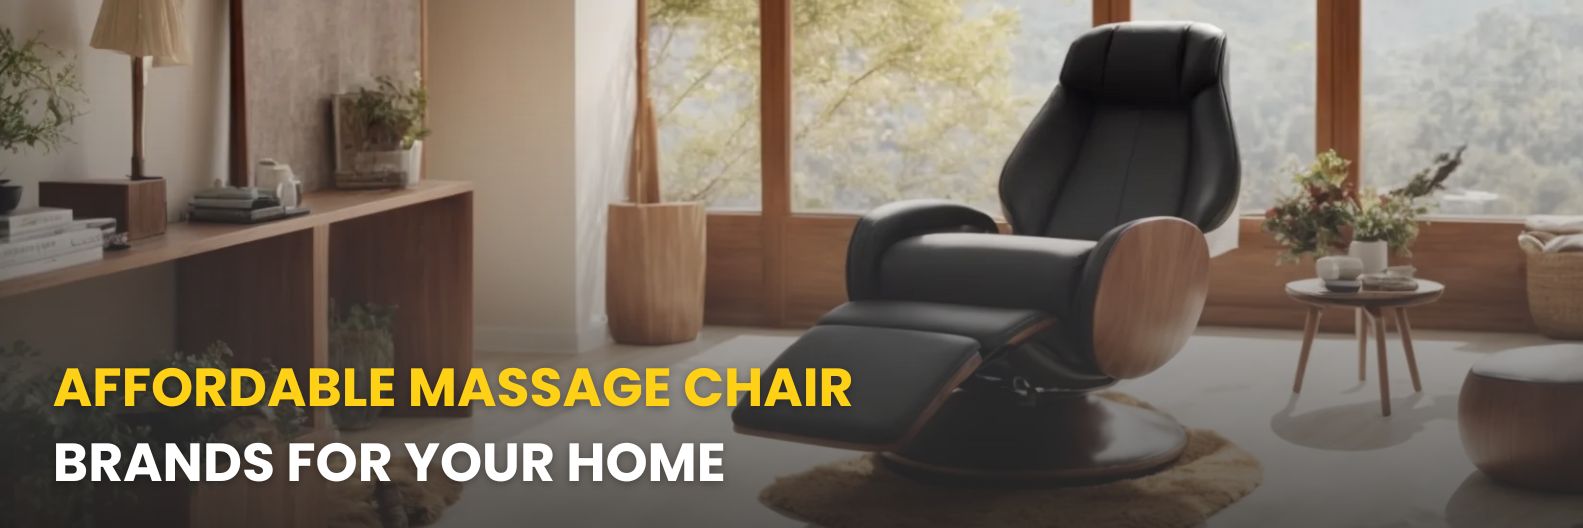 Find affordable massage chairs for home: Enjoy comfort and savings with top brands designed for everyday relaxation including Daiwa, Infinity, and Osaki massage chairs.